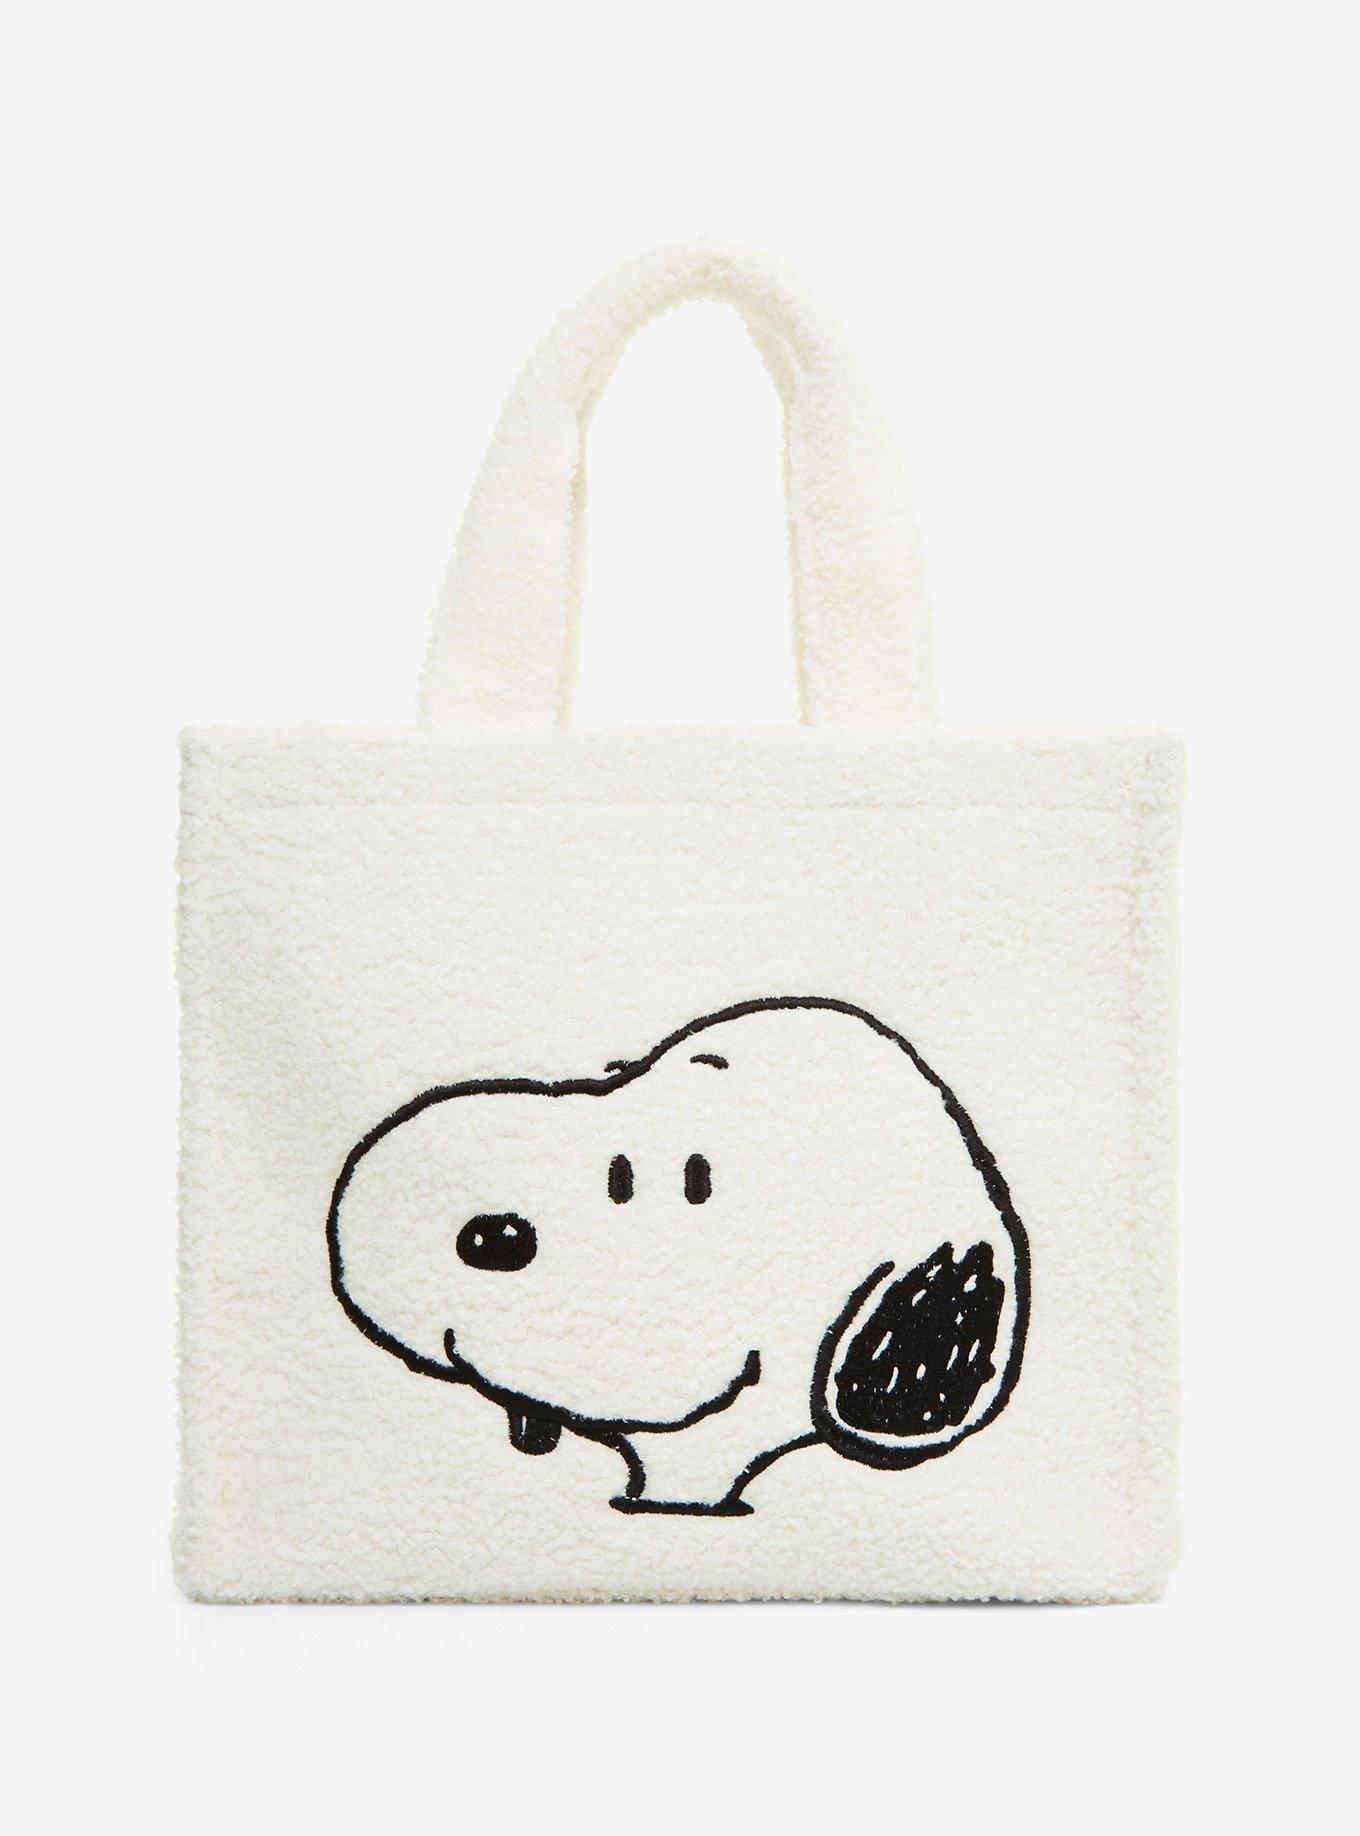 Snoopy & Chalie Brown  Snoopy purse, Snoopy bag, Purses and bags